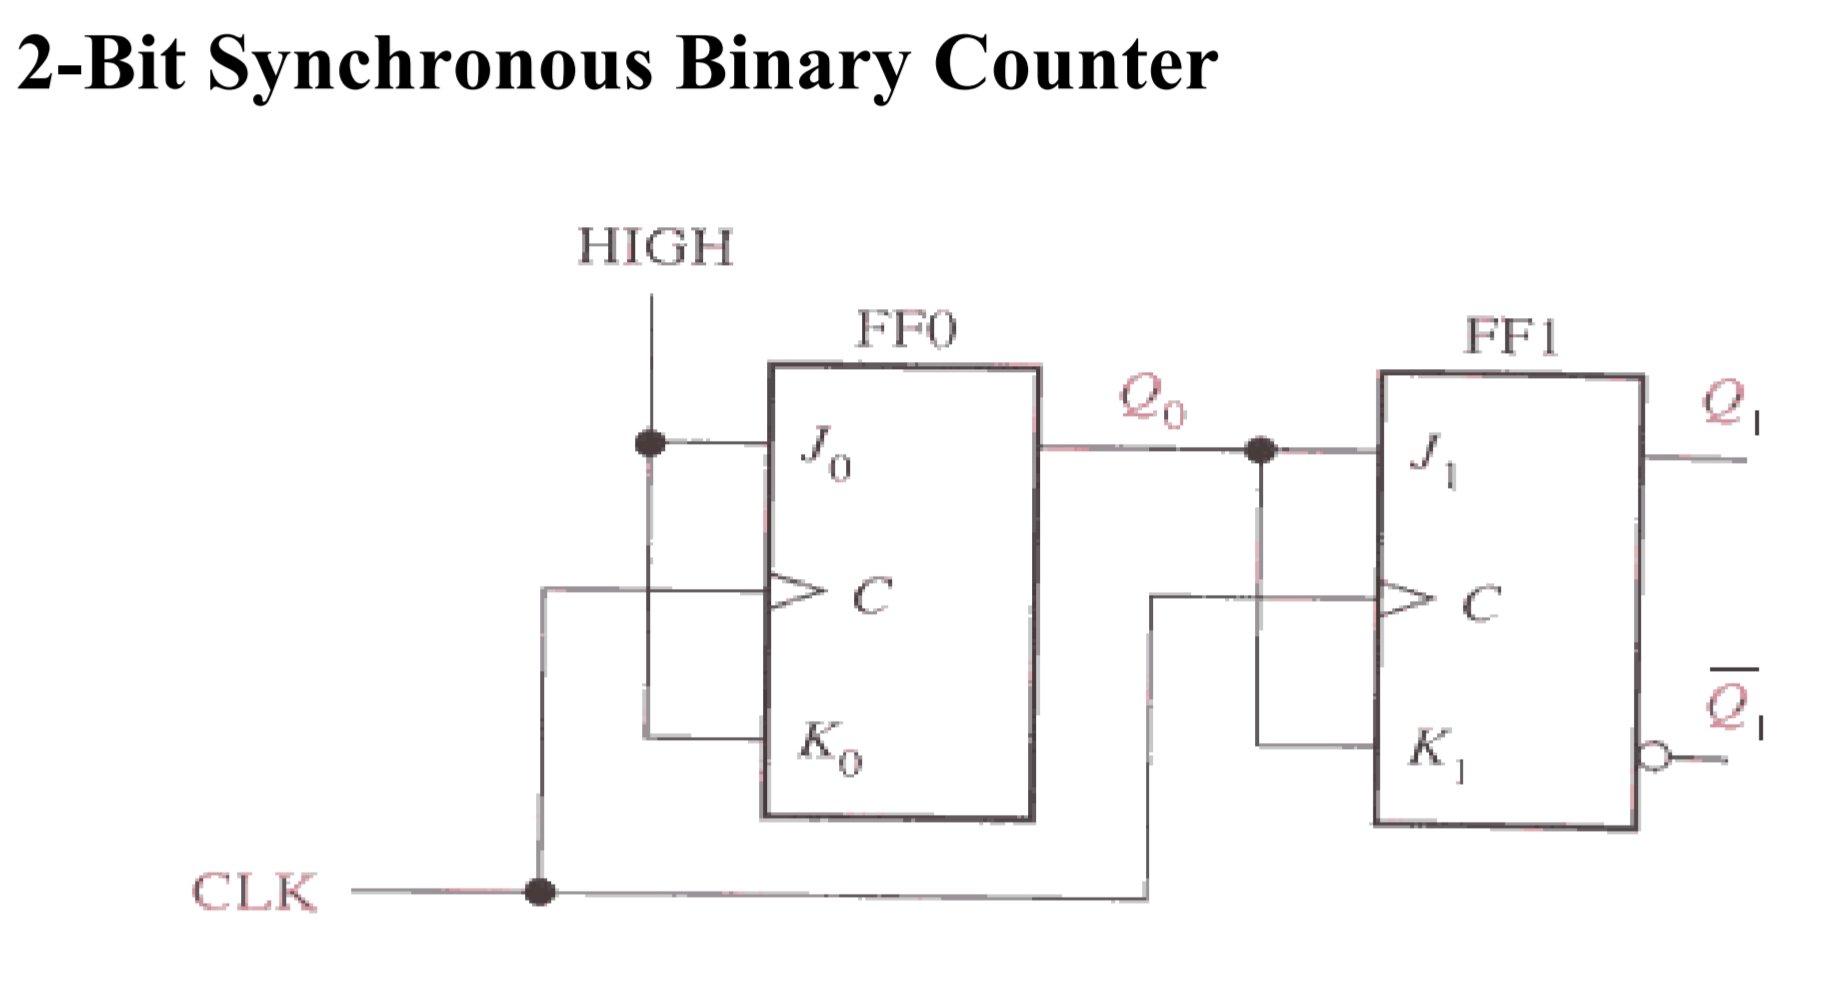 What is Johnson counter? - Quora